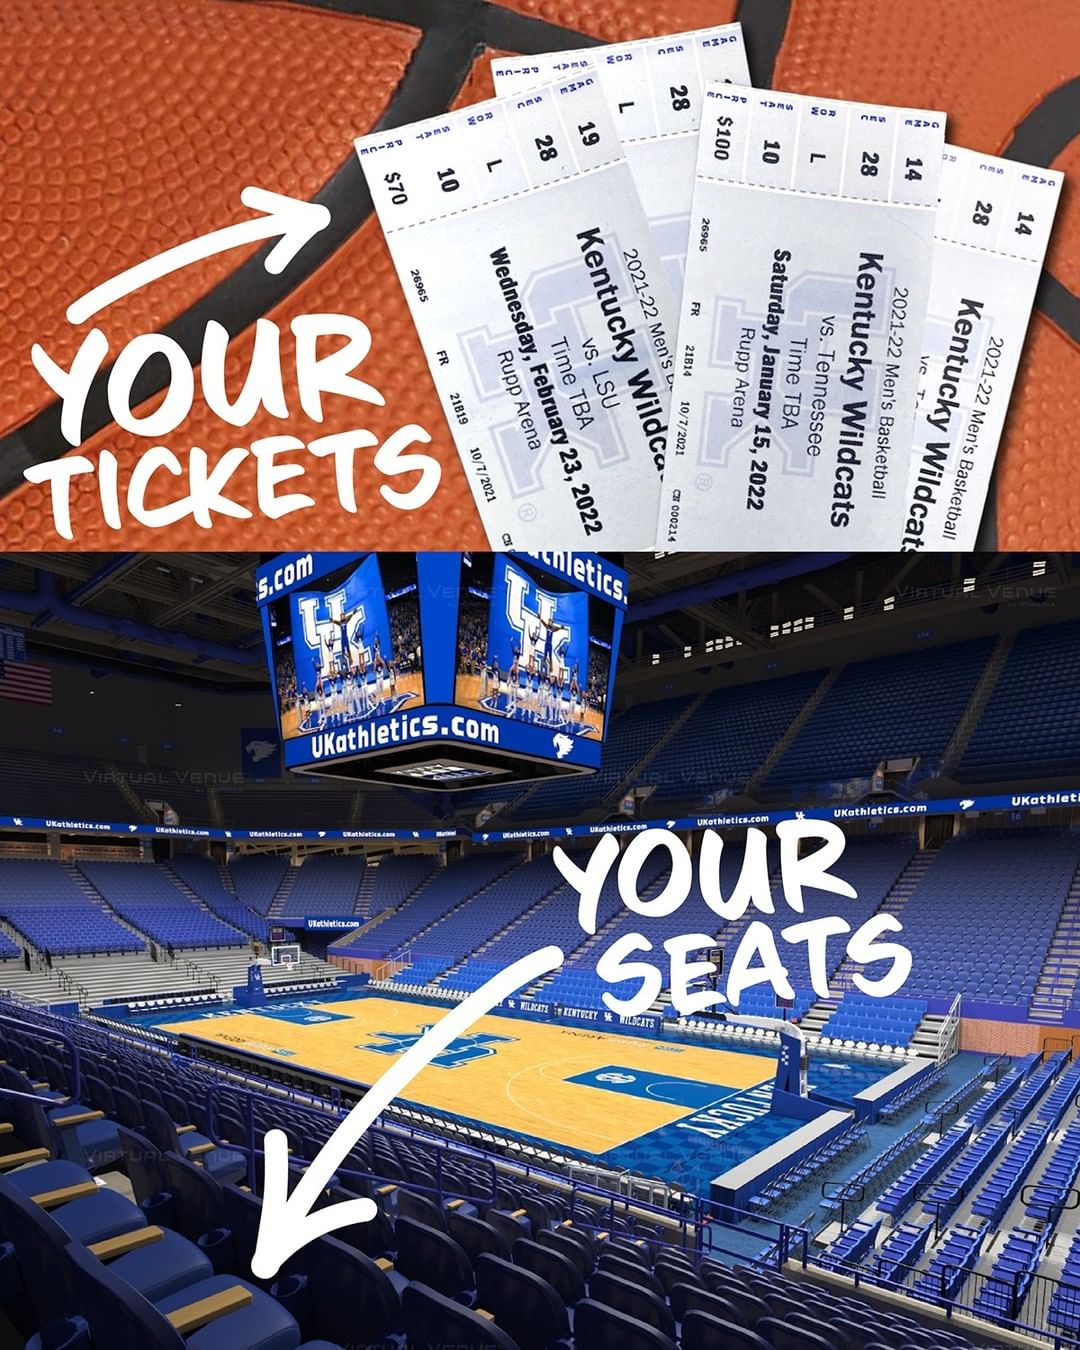 RAFFLE TIME! 

Excellent lower arena seats for 2 to see UK take on Tennessee AND LSU at Rupp Arena 😱 Come and get 'em, <a target='_blank' href='https://www.instagram.com/explore/tags/BBN/'>#BBN</a>! 

🔗 woodford-humane-society.square.site/bbn-raffle

These tickets are valued at over $600 but some lucky Cats fan is going to get a heck of a deal: raffle tickets are just $50. 

Tickets available until noon on Wednesday November 24. In the meantime, GO CATS...and go stock up on tickets! 

<a target='_blank' href='https://www.instagram.com/explore/tags/gobigblue/'>#gobigblue</a> <a target='_blank' href='https://www.instagram.com/explore/tags/bigbluenation/'>#bigbluenation</a> <a target='_blank' href='https://www.instagram.com/explore/tags/rupparena/'>#rupparena</a> <a target='_blank' href='https://www.instagram.com/explore/tags/gocats/'>#gocats</a> <a target='_blank' href='https://www.instagram.com/explore/tags/charityraffle/'>#charityraffle</a> <a target='_blank' href='https://www.instagram.com/explore/tags/givelocal/'>#givelocal</a> <a target='_blank' href='https://www.instagram.com/explore/tags/givelocalky/'>#givelocalky</a> <a target='_blank' href='https://www.instagram.com/explore/tags/sharethelex/'>#sharethelex</a> <a target='_blank' href='https://www.instagram.com/explore/tags/sharethelexpets/'>#sharethelexpets</a>